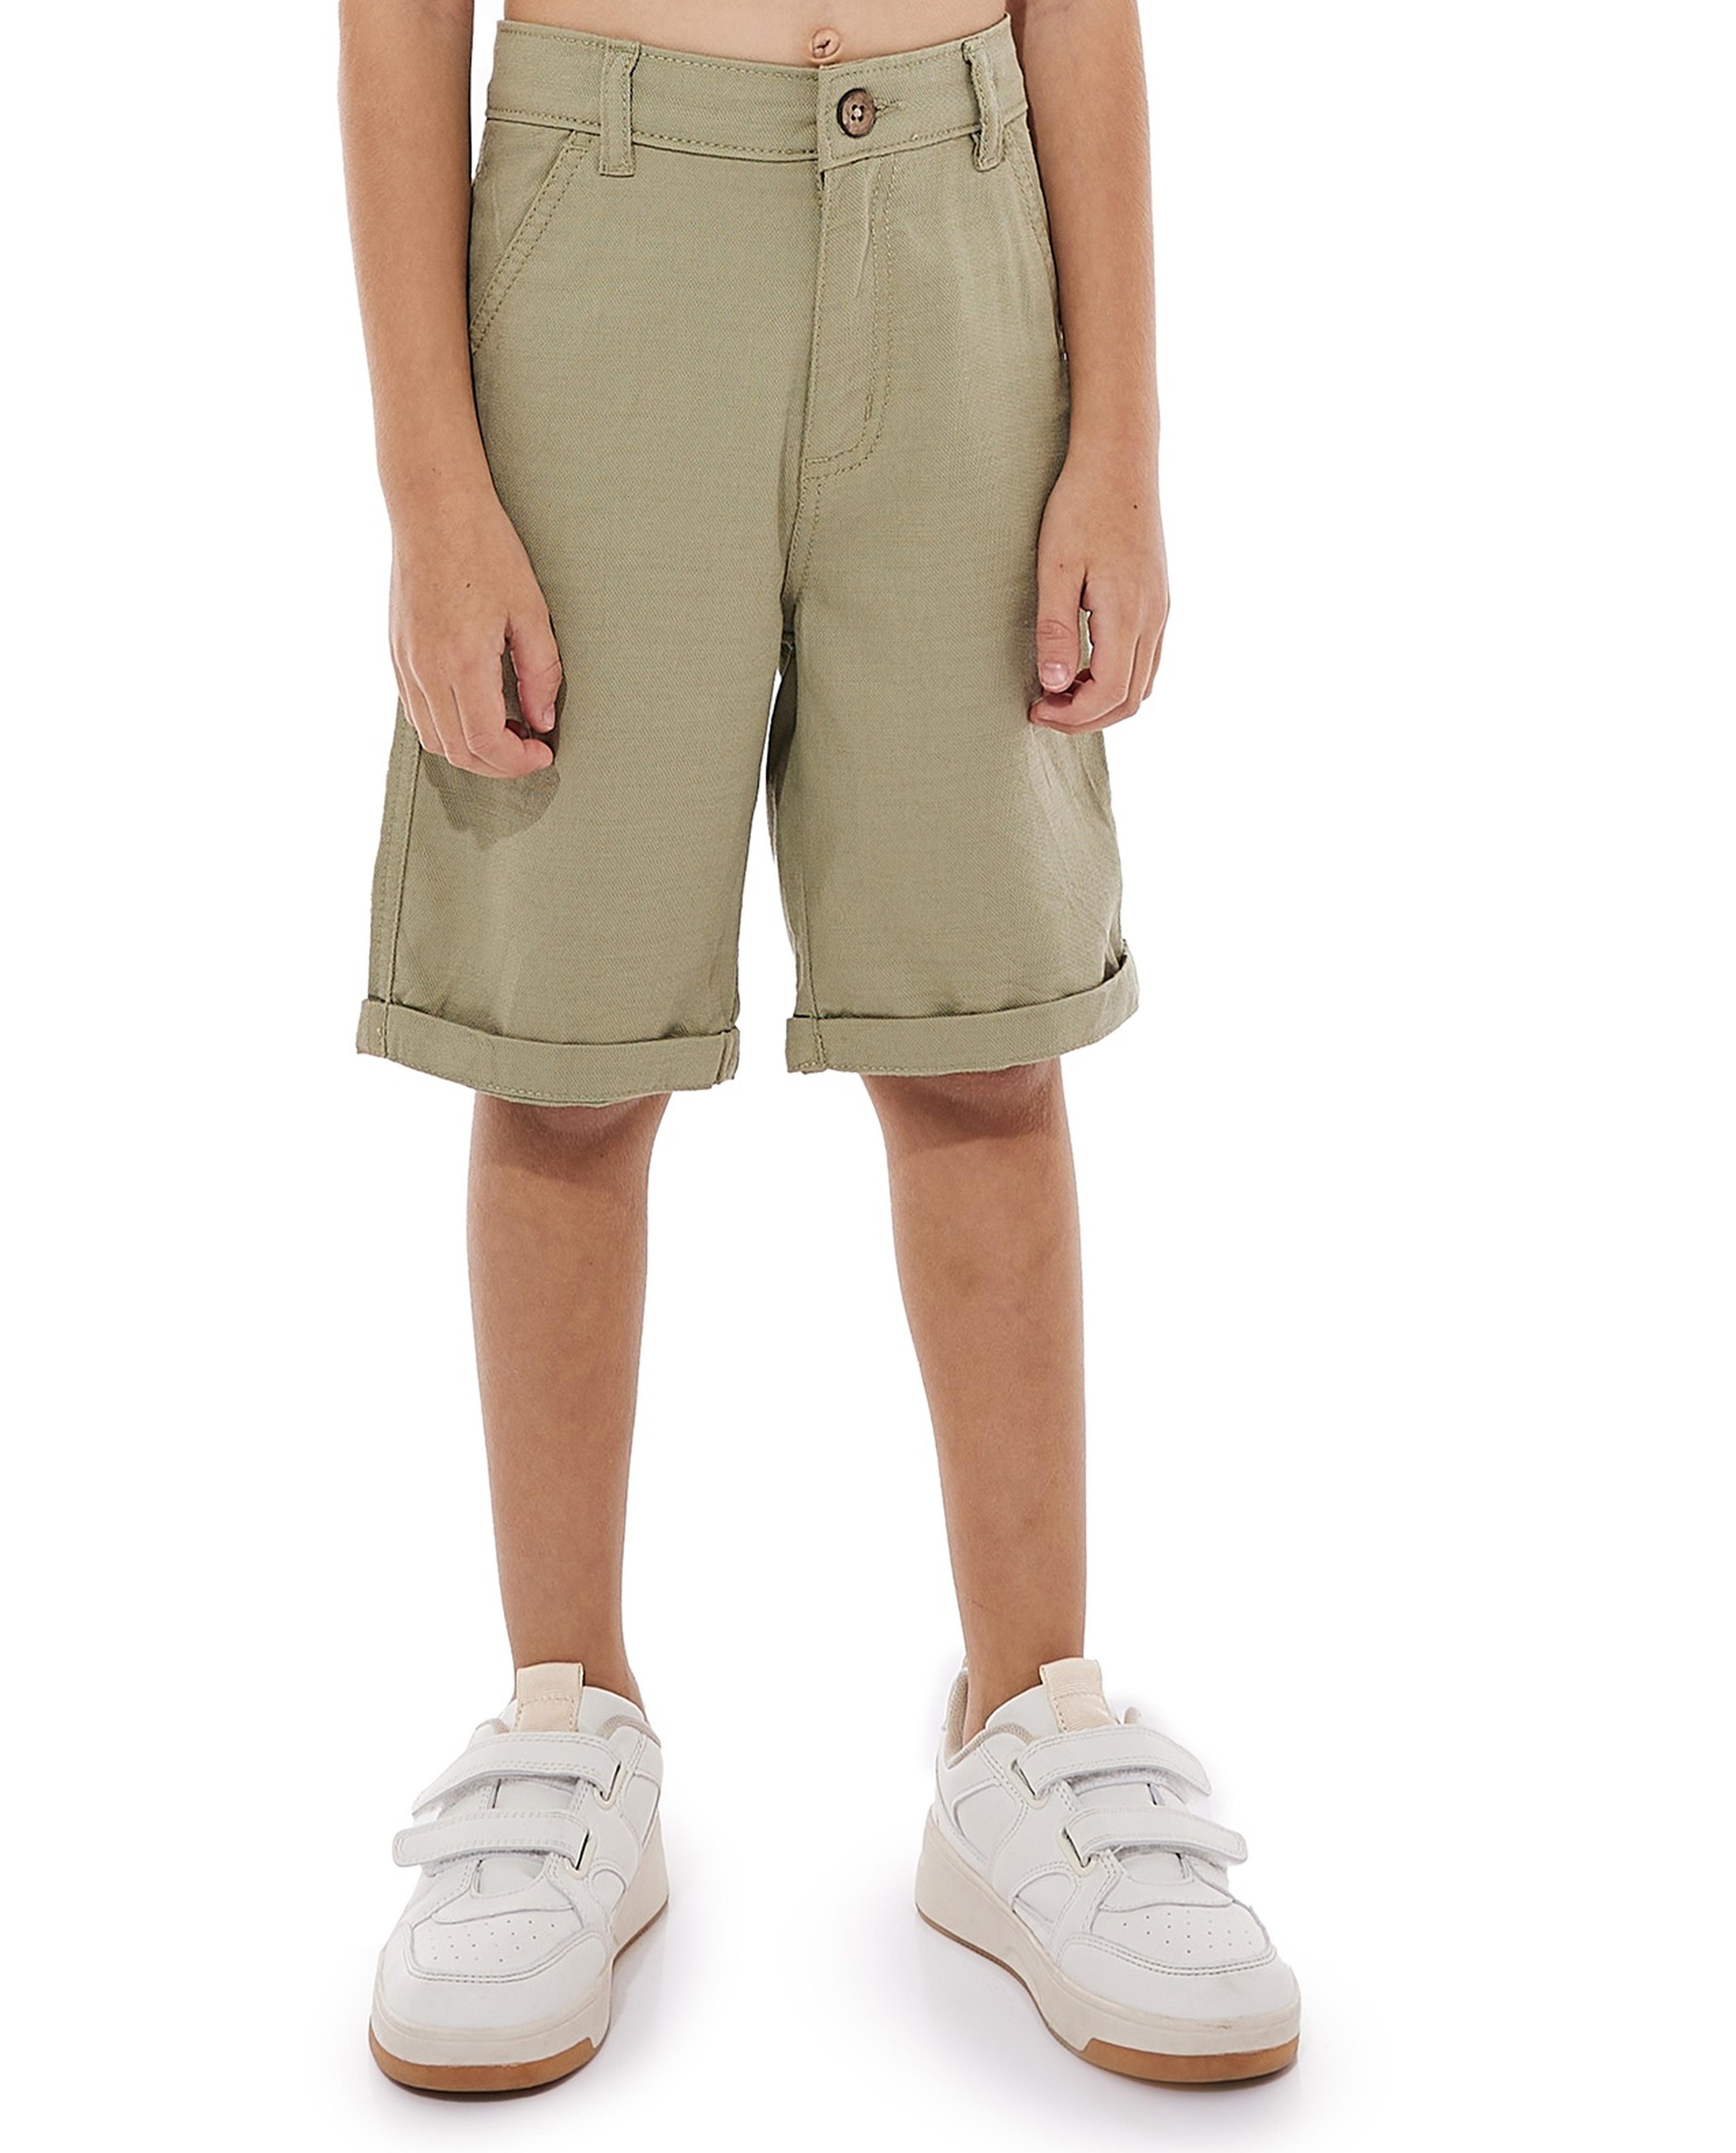 Woven Shorts with Button Closure